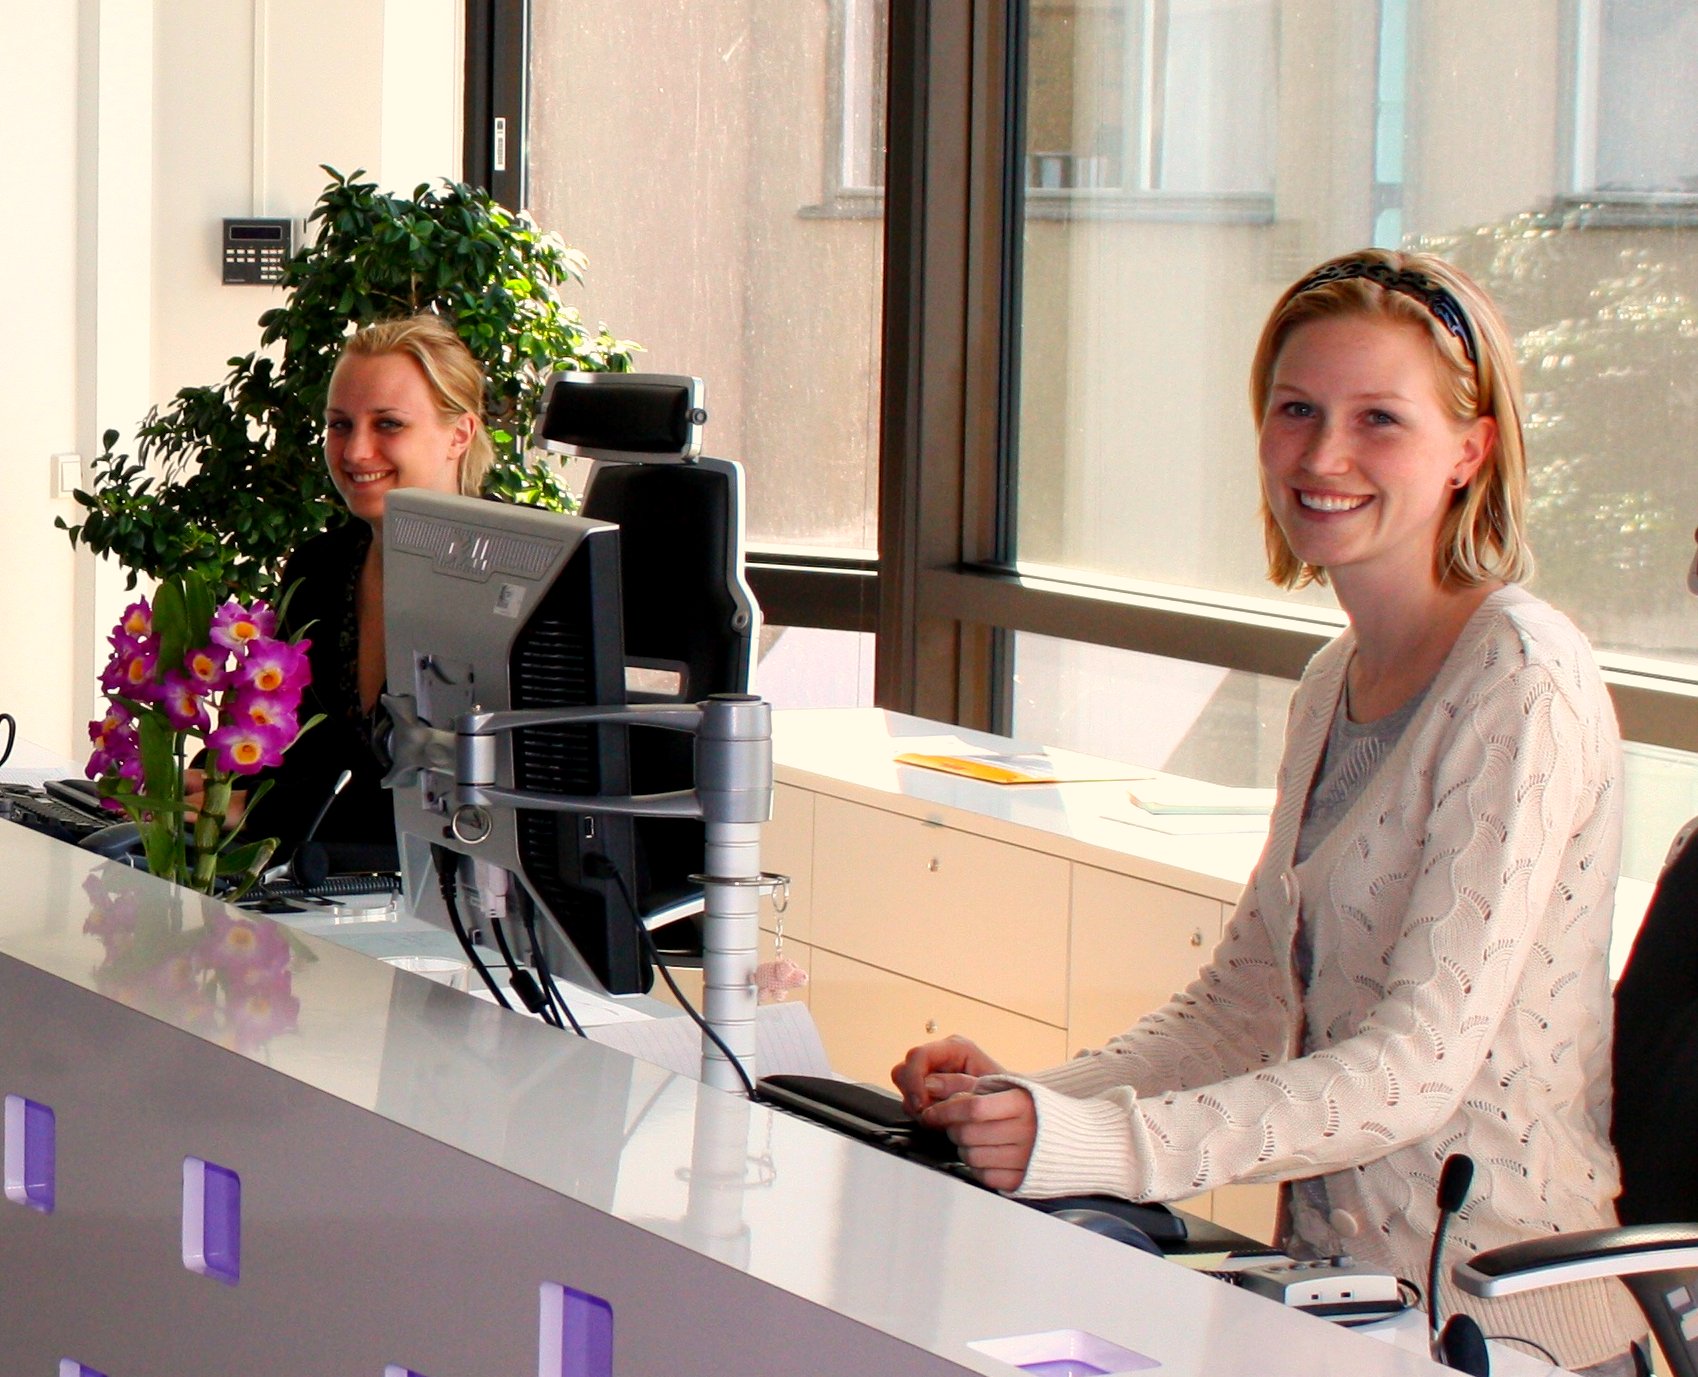 What are the skills required for employment in a receptionist role?